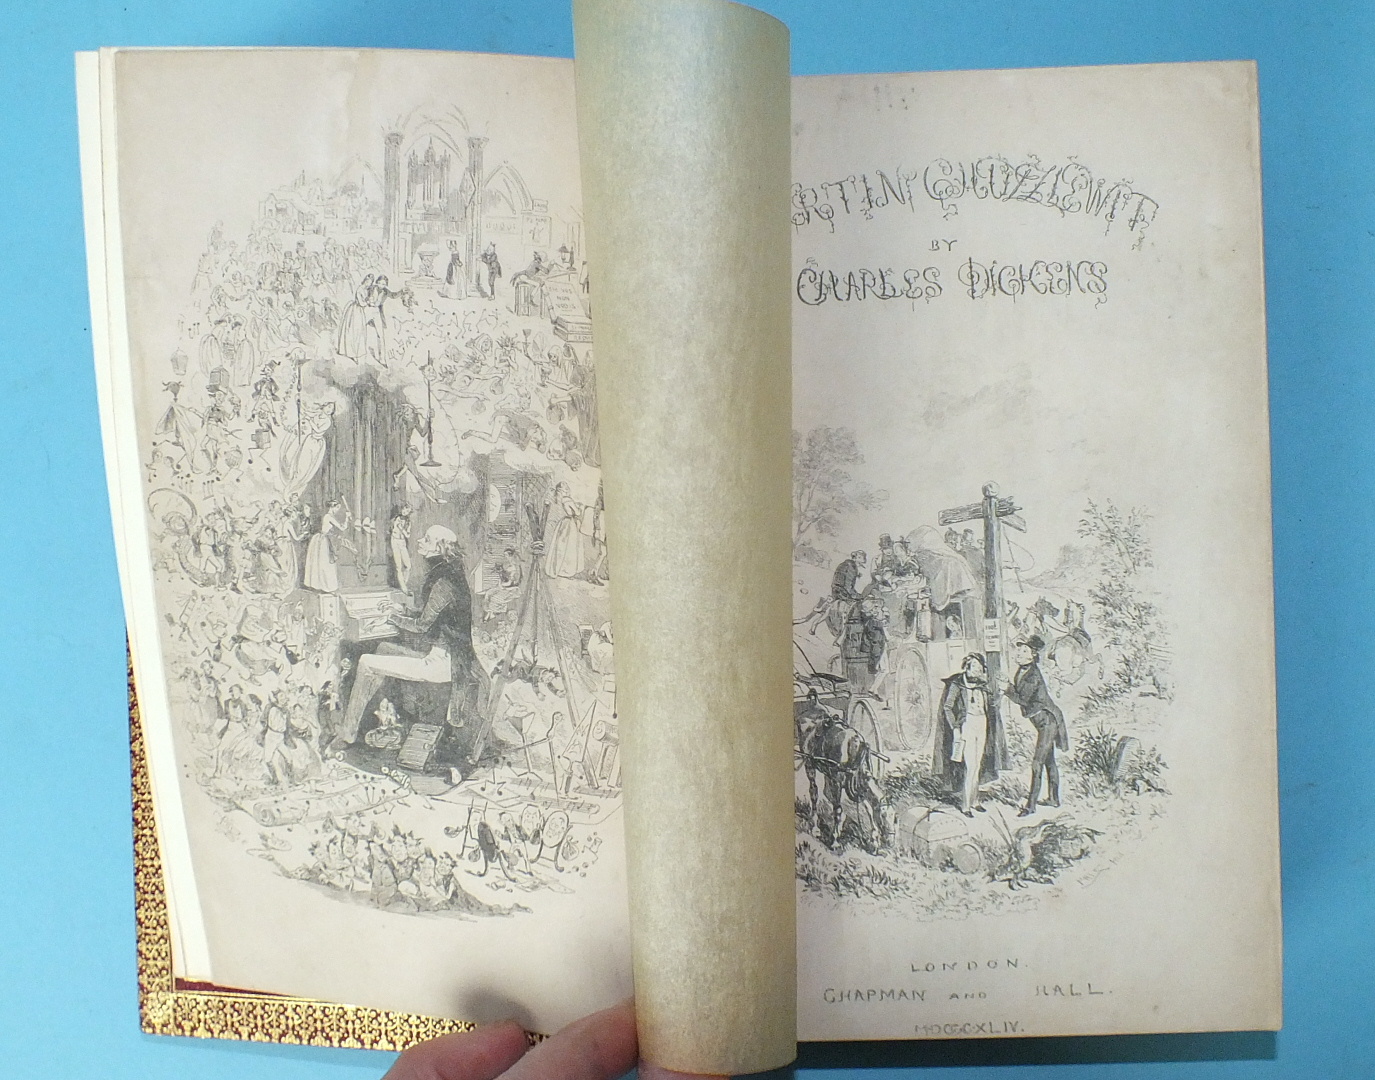 Dickens (Charles), The Life and Adventures of Martin Chuzzlewit, 1st Edition, 1st Issue, (with - Image 4 of 4